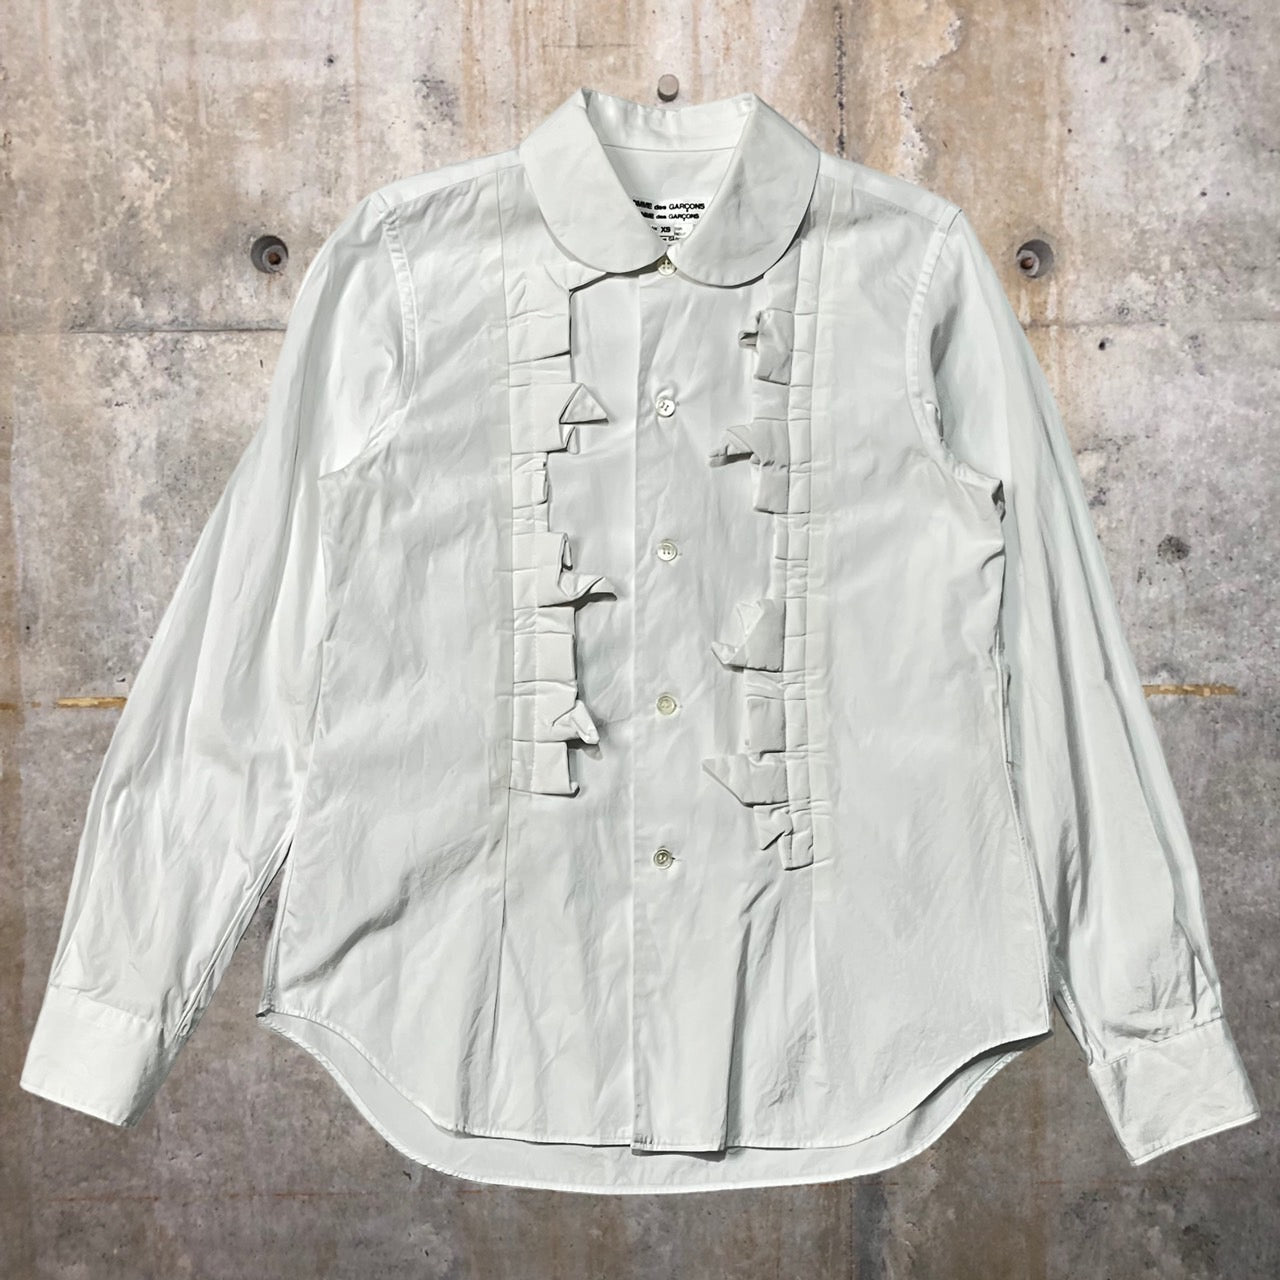 COMME des GARCONS SHIRT 17aw ドッキングブラウス-